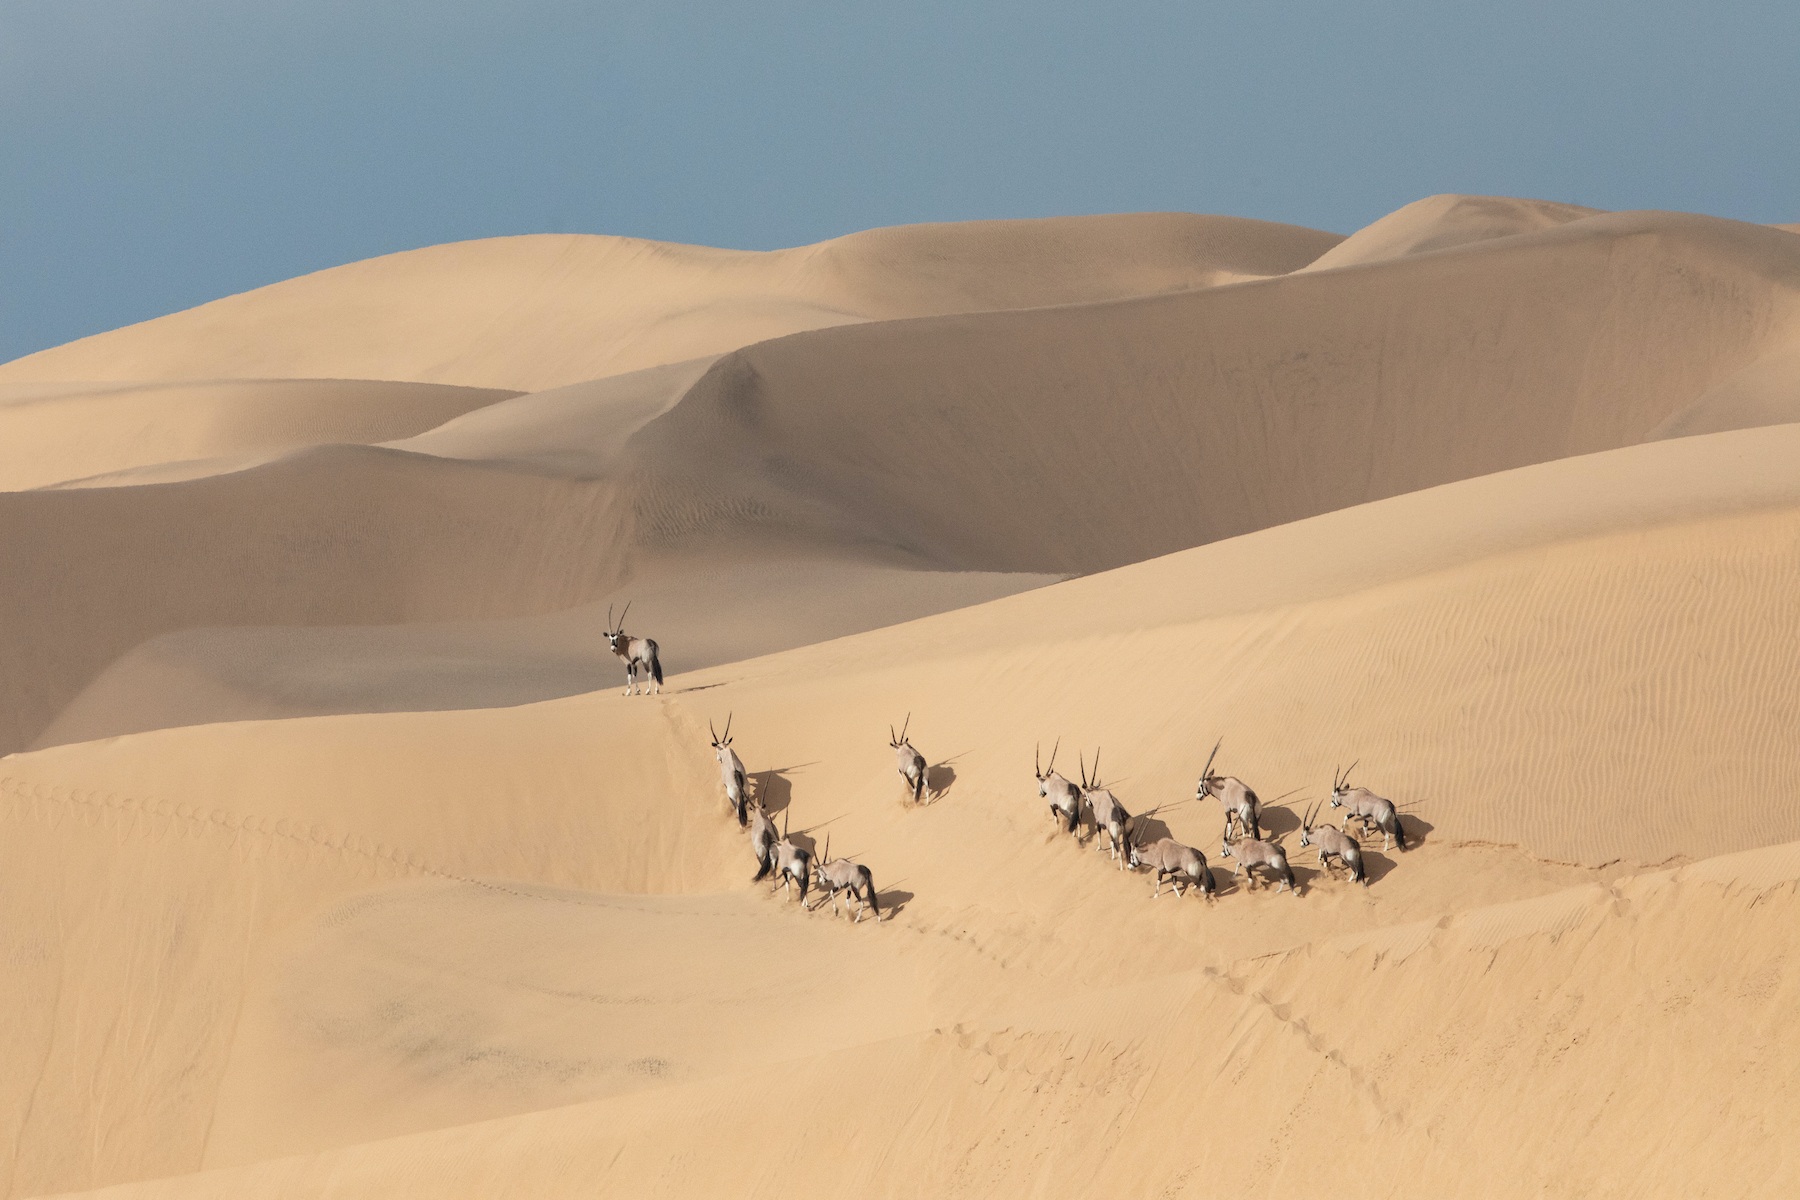 An Oryx checks on his herd mates in the dunes of Sandwich Harbour